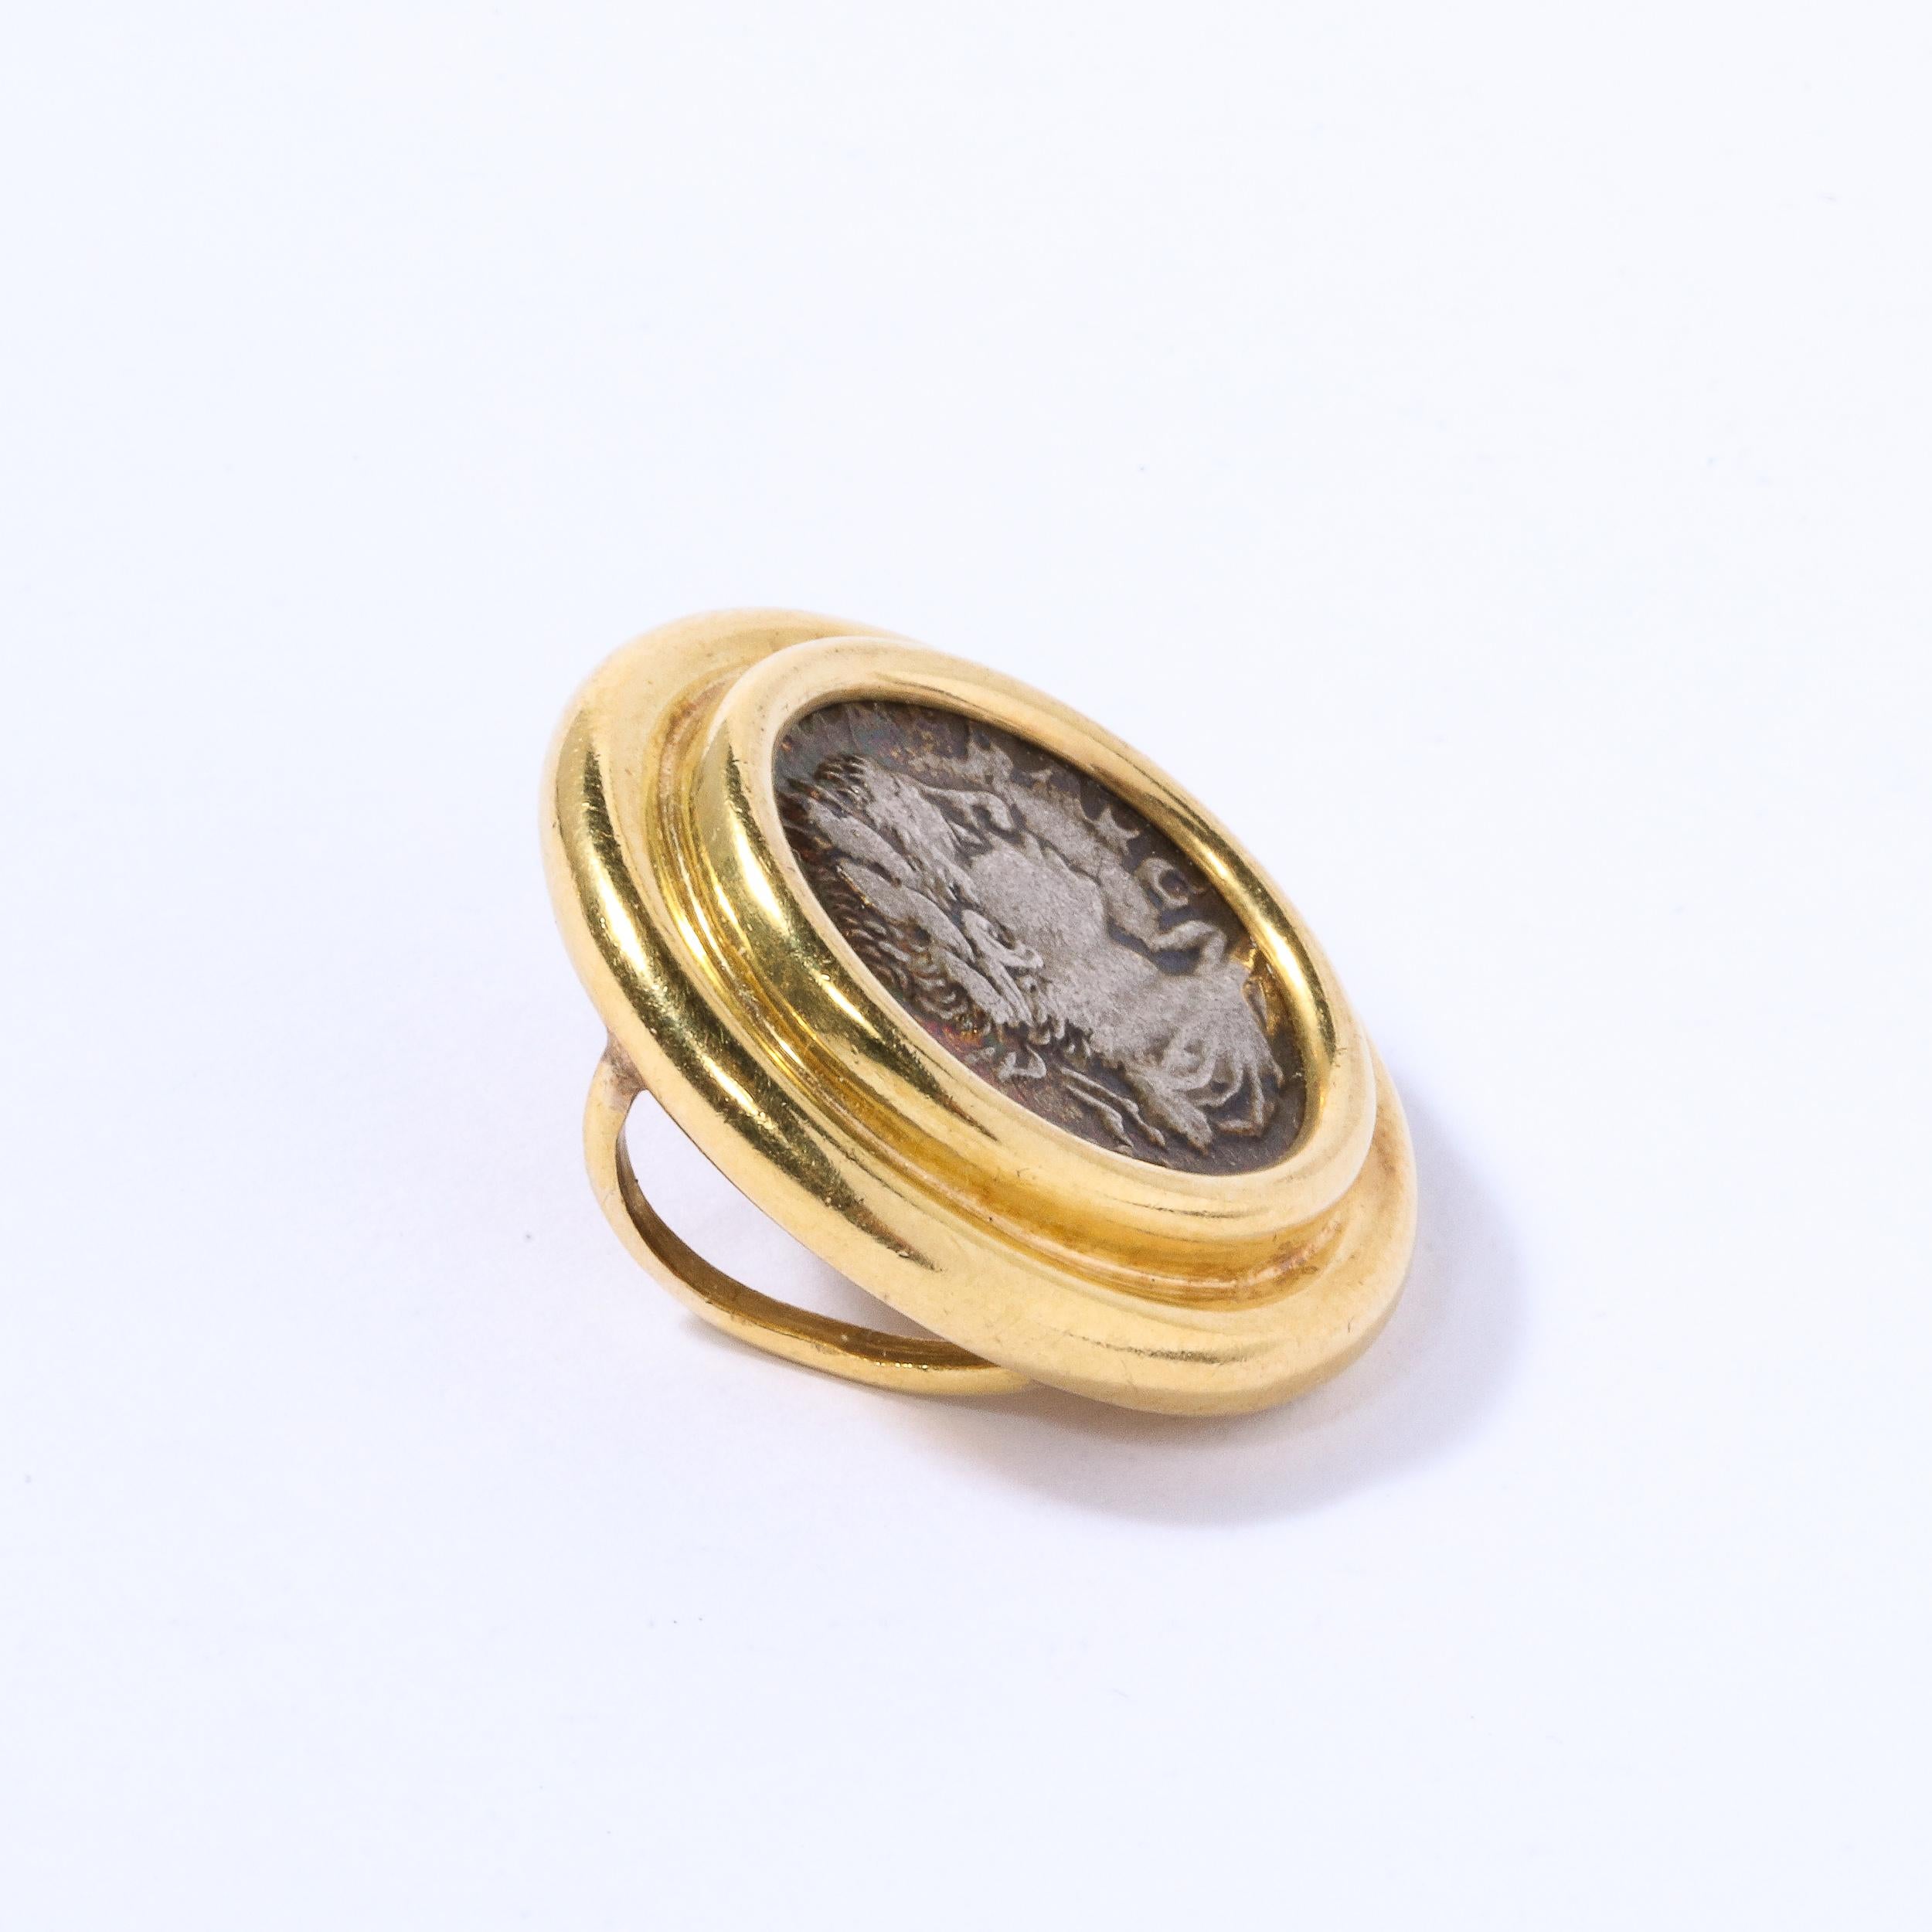 Italian Modernist Slide Pendant with Ancient Roman Figurative Coin in 18kt gold For Sale 4